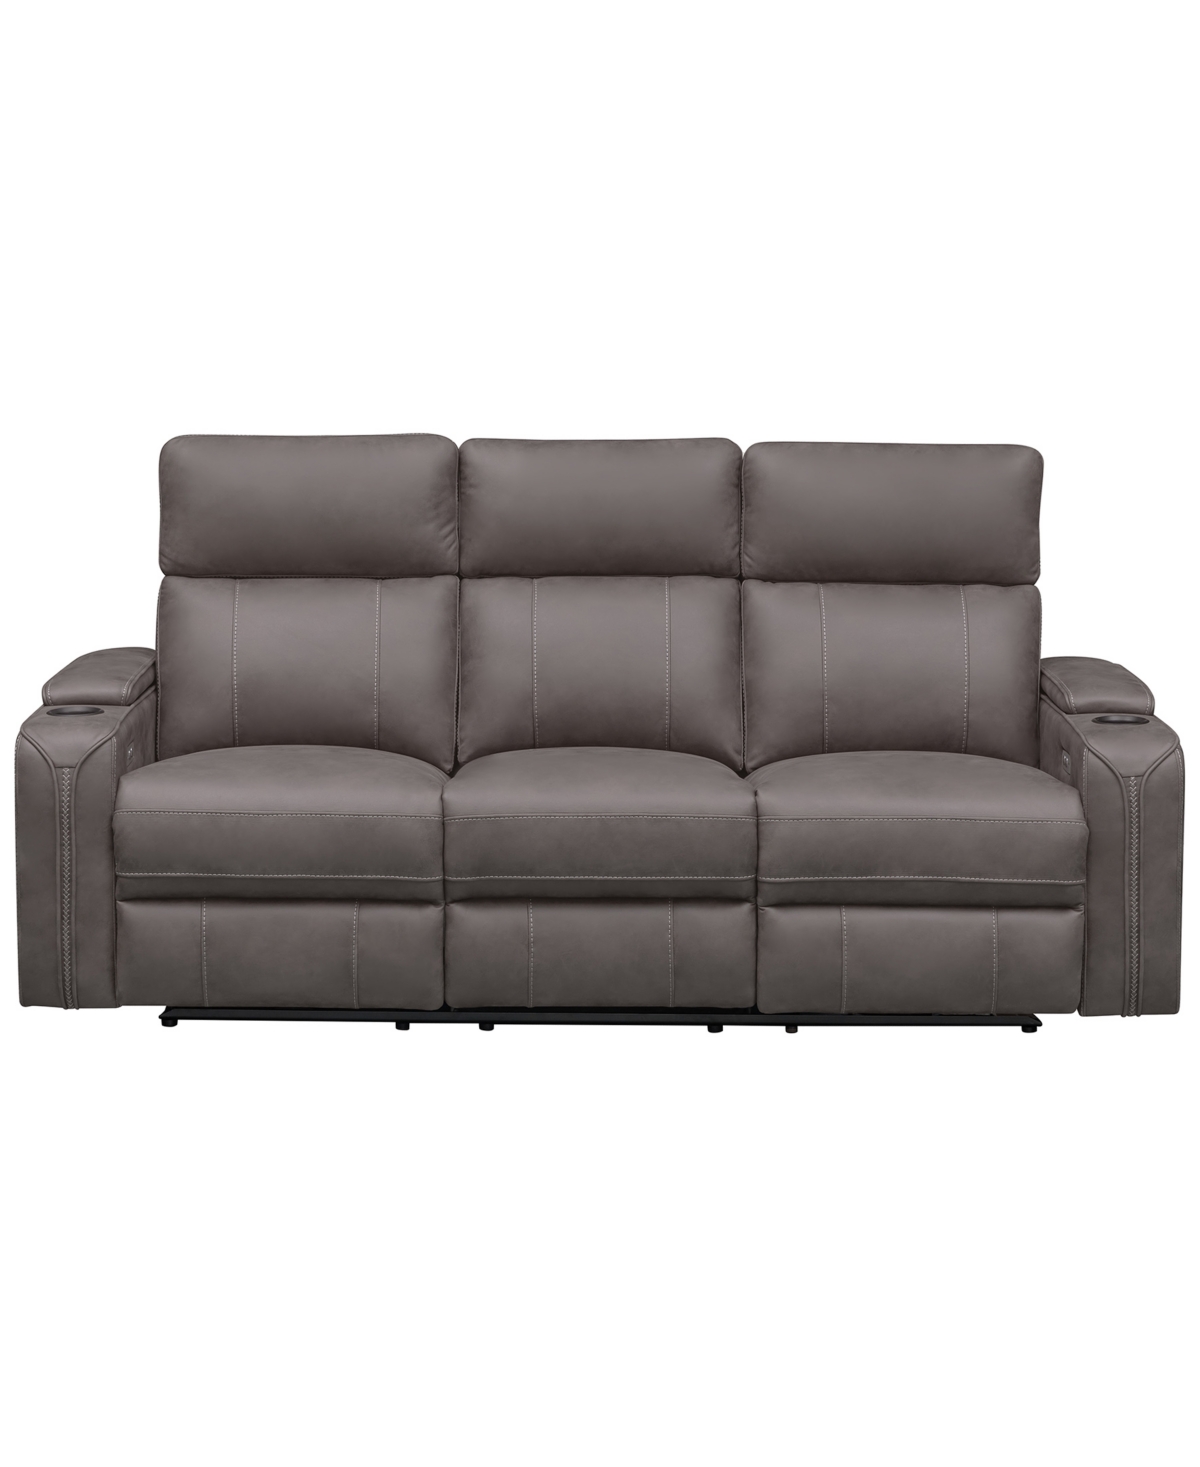 Shop Abbyson Living Avenger 85.8" Fabric With Dropdown Table Power Reclining Sofa In Gray